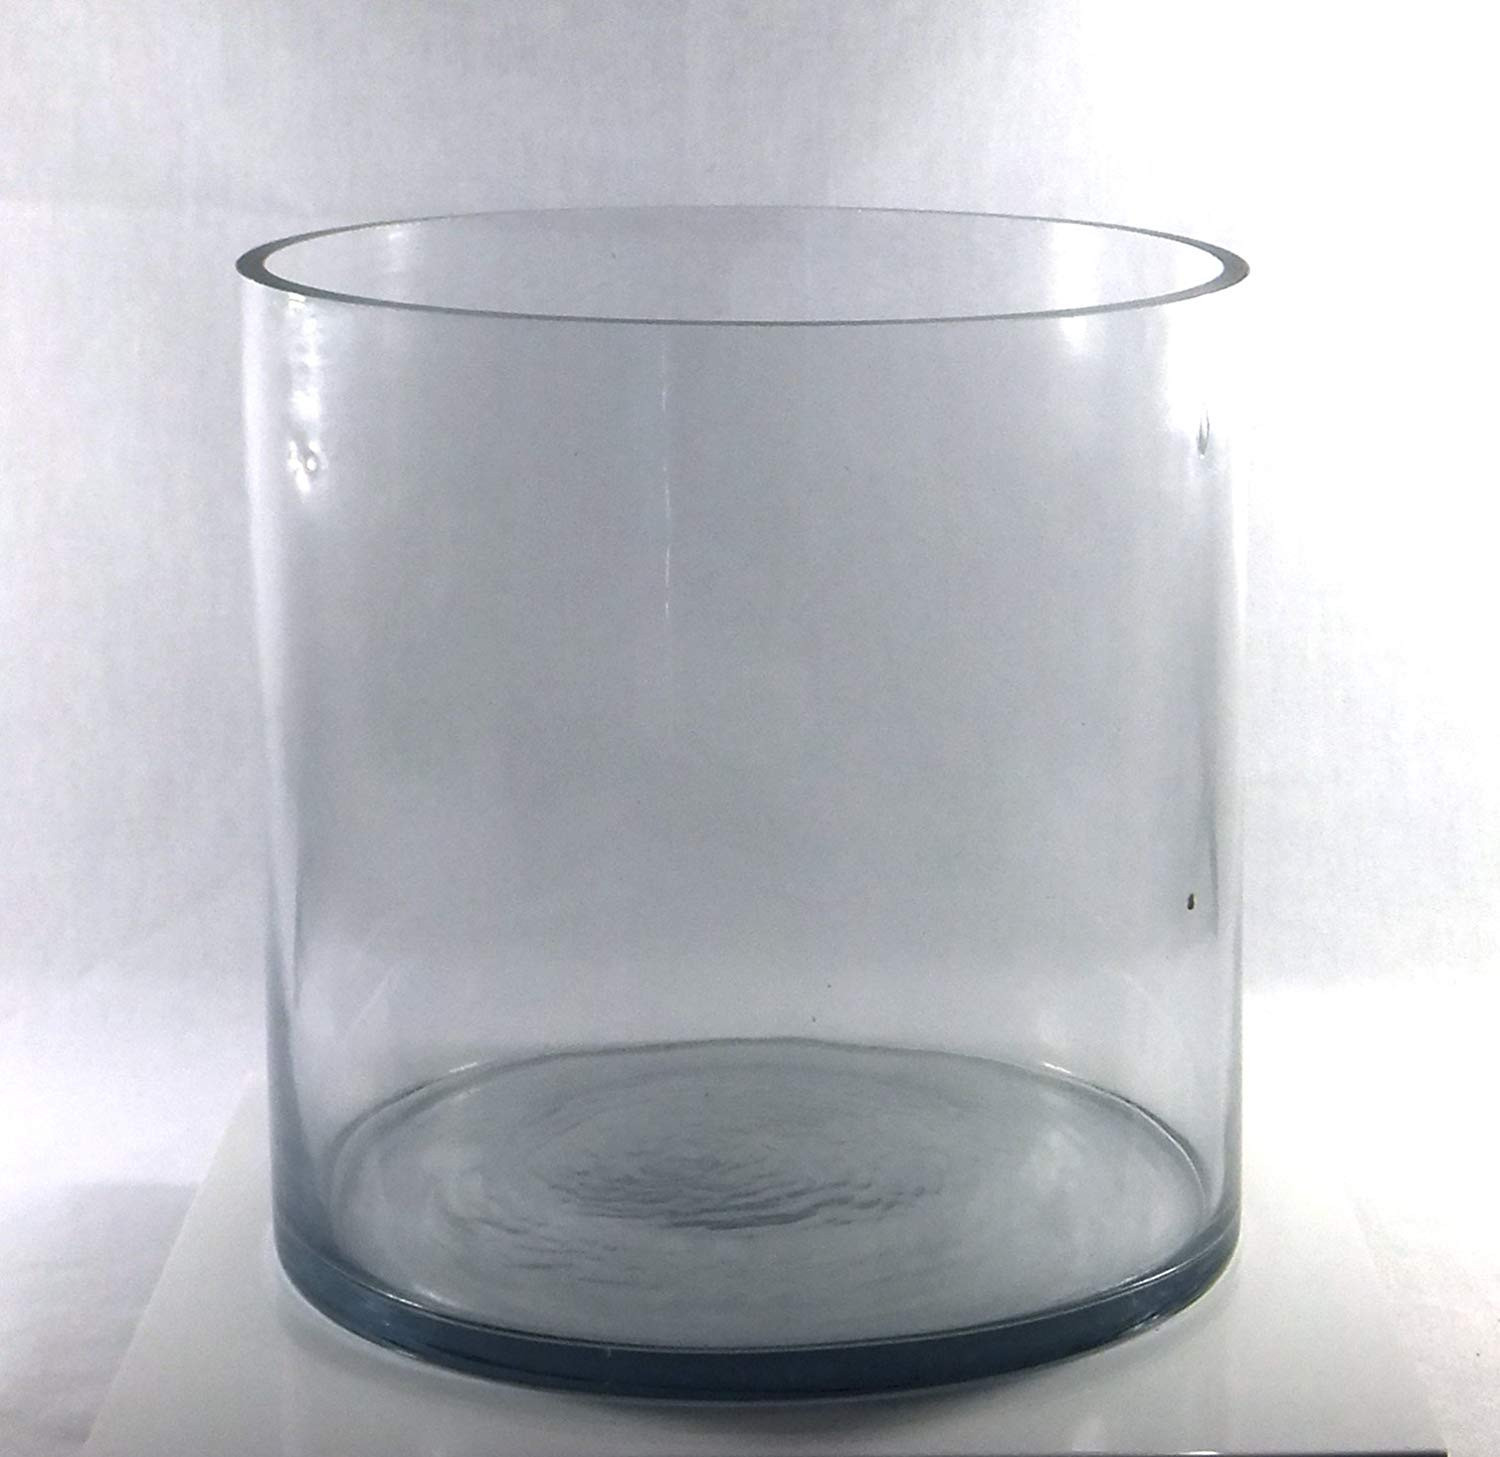 16 Perfect orrefors Glass Vase 2024 free download orrefors glass vase of round glass vases images new clear plastic vases for centerpieces within gallery of round glass vases